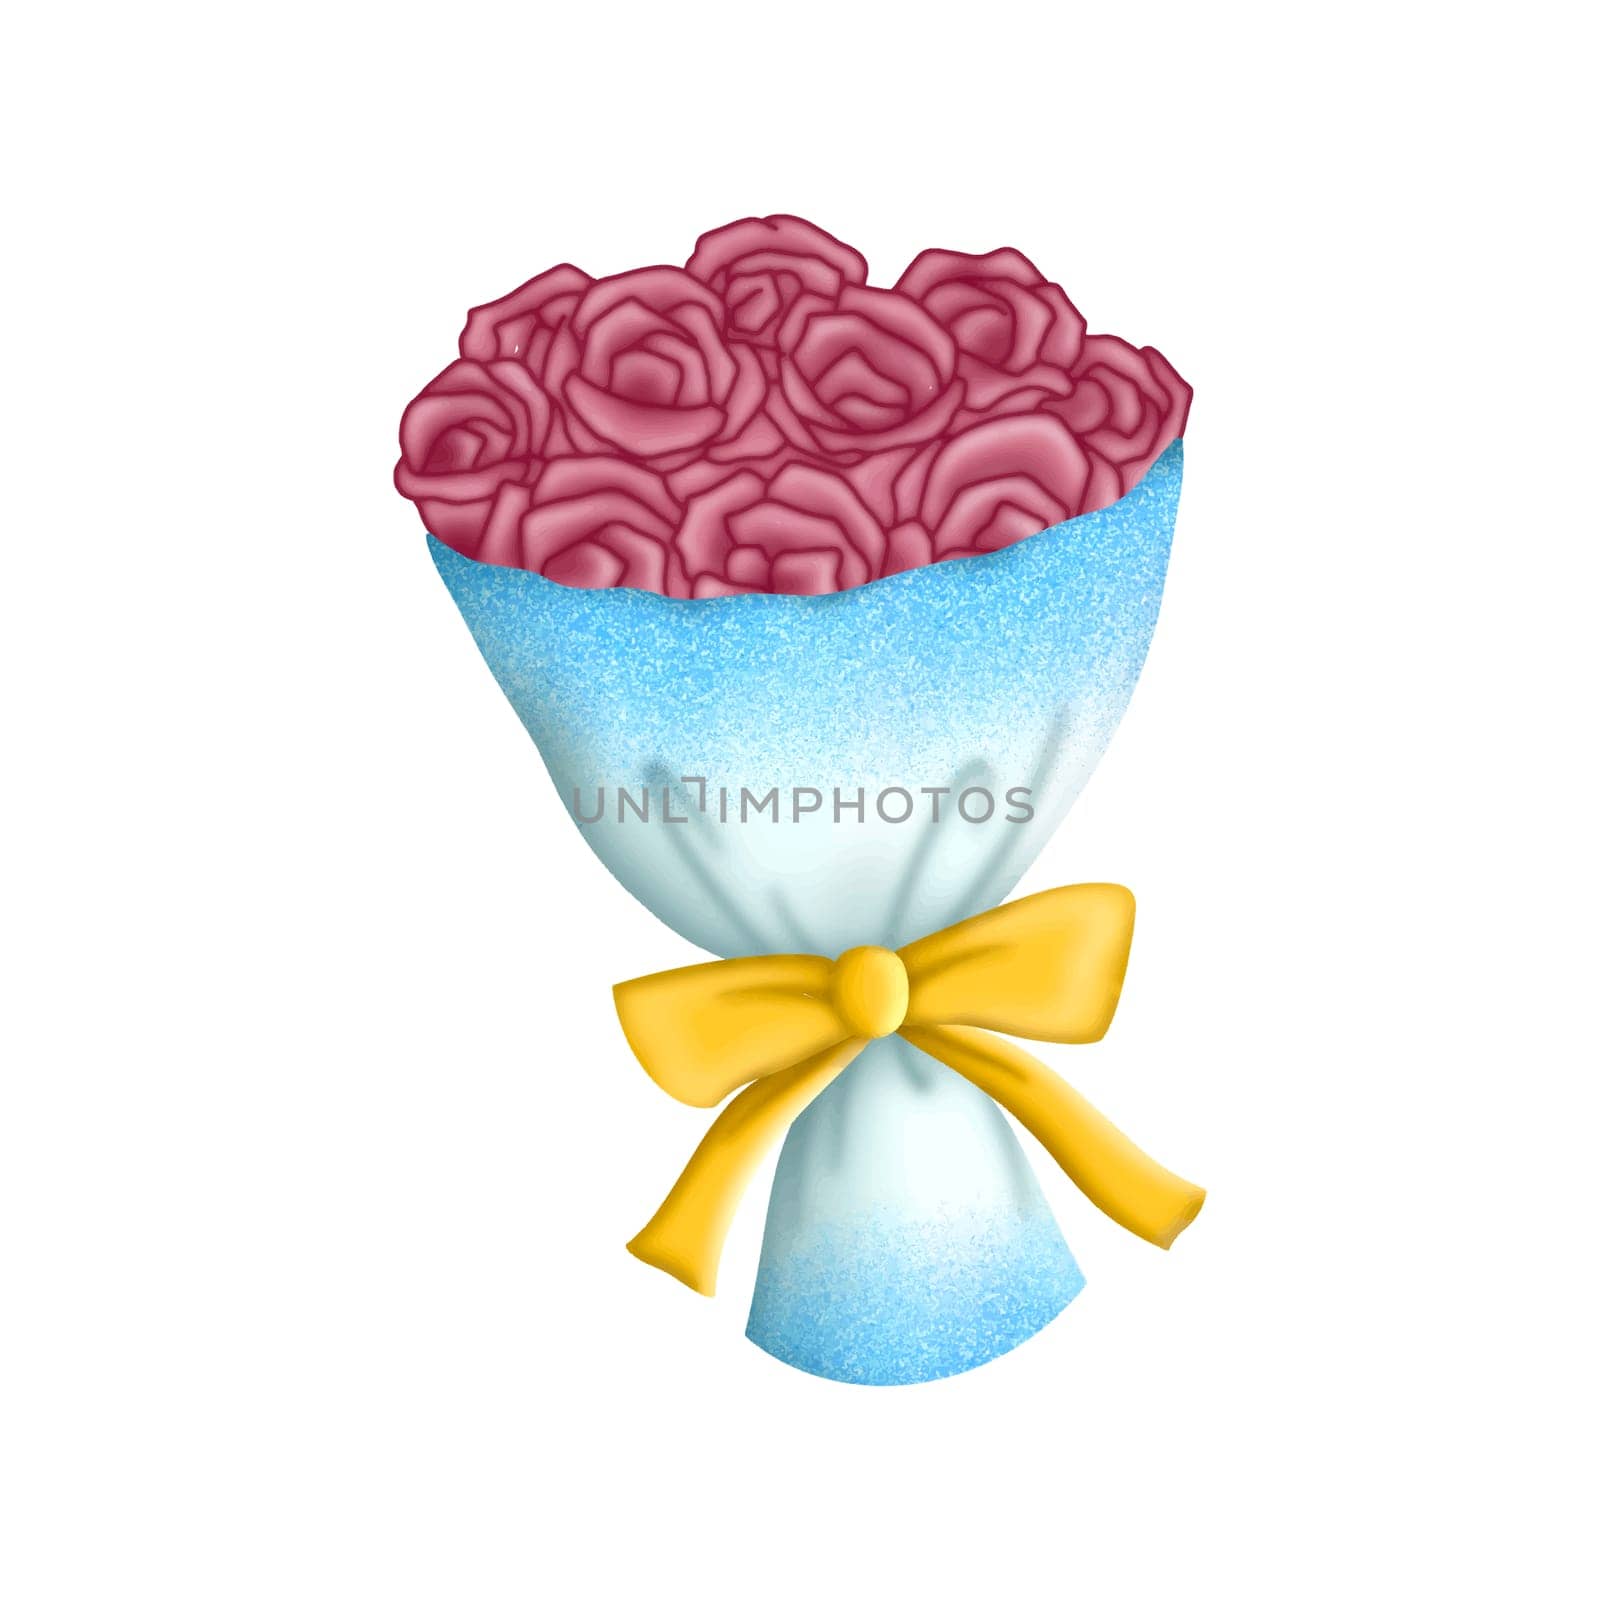 Red Roses Bouquet wrapped with white blue sparkling paper isolated on white background. Party Clipart for celebration design, planner sticker, pattern, background, invitations, greeting cards, sublimation.